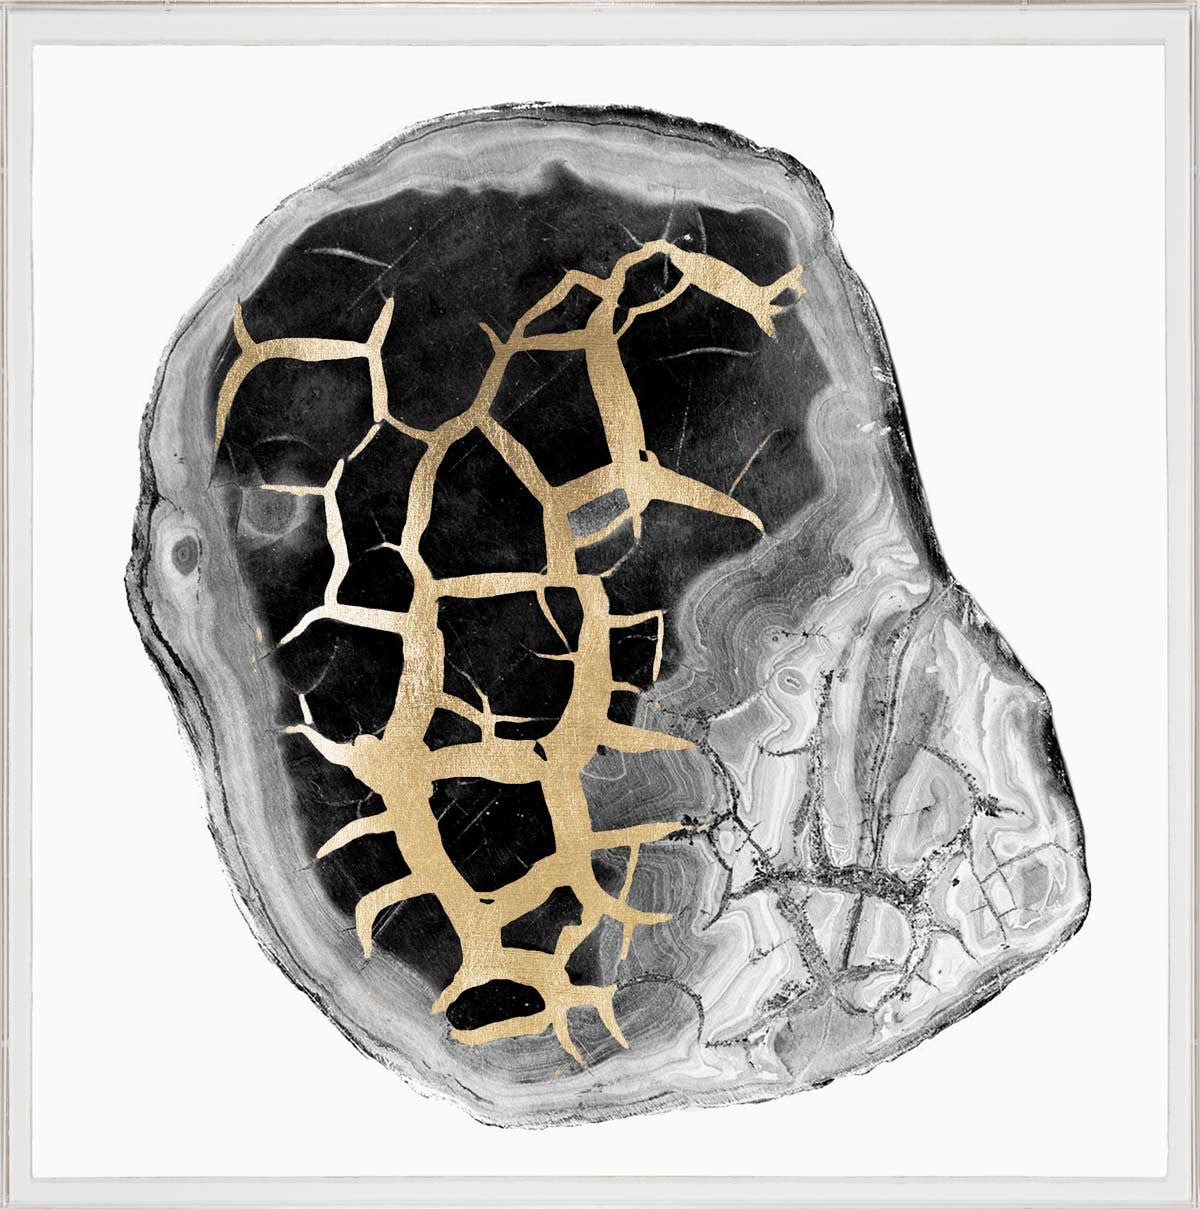 Natural Curiosities Black and White Geode 2 Artwork